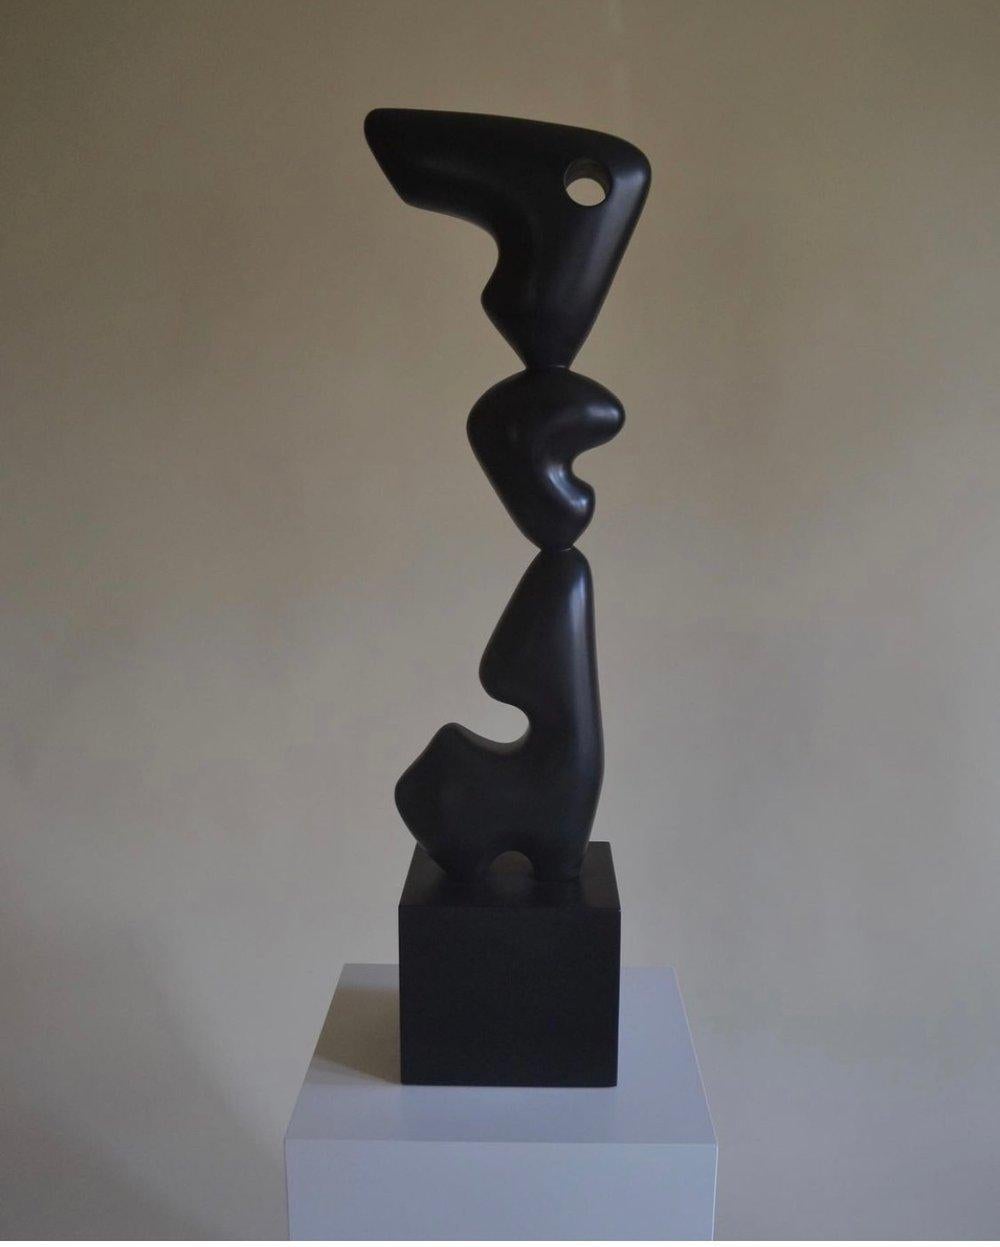 Macedoine Sculpture by Chandler McLellan
Limited Edition of 8 Pieces.
Dimensions: D 17.8 x W 25.4 x H 83.8 cm. 
Materials: Painted black hard maple. 

Sculptures will be signed and numbered on the bottom of the base. Wood grain will vary, wood